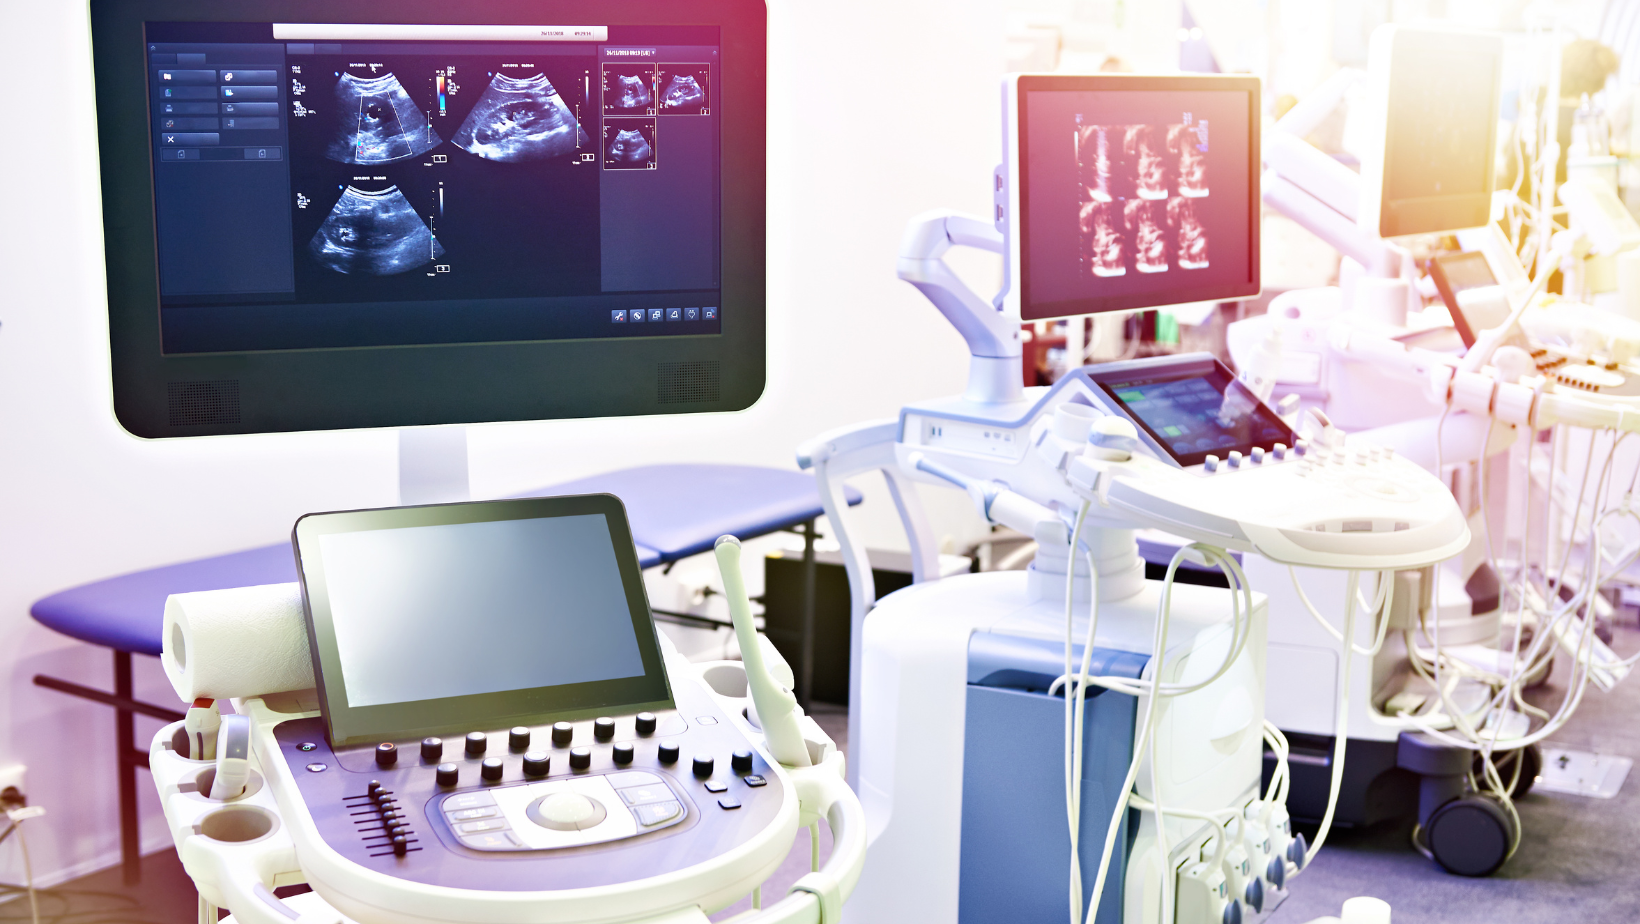 The most common ultrasound repairs explained